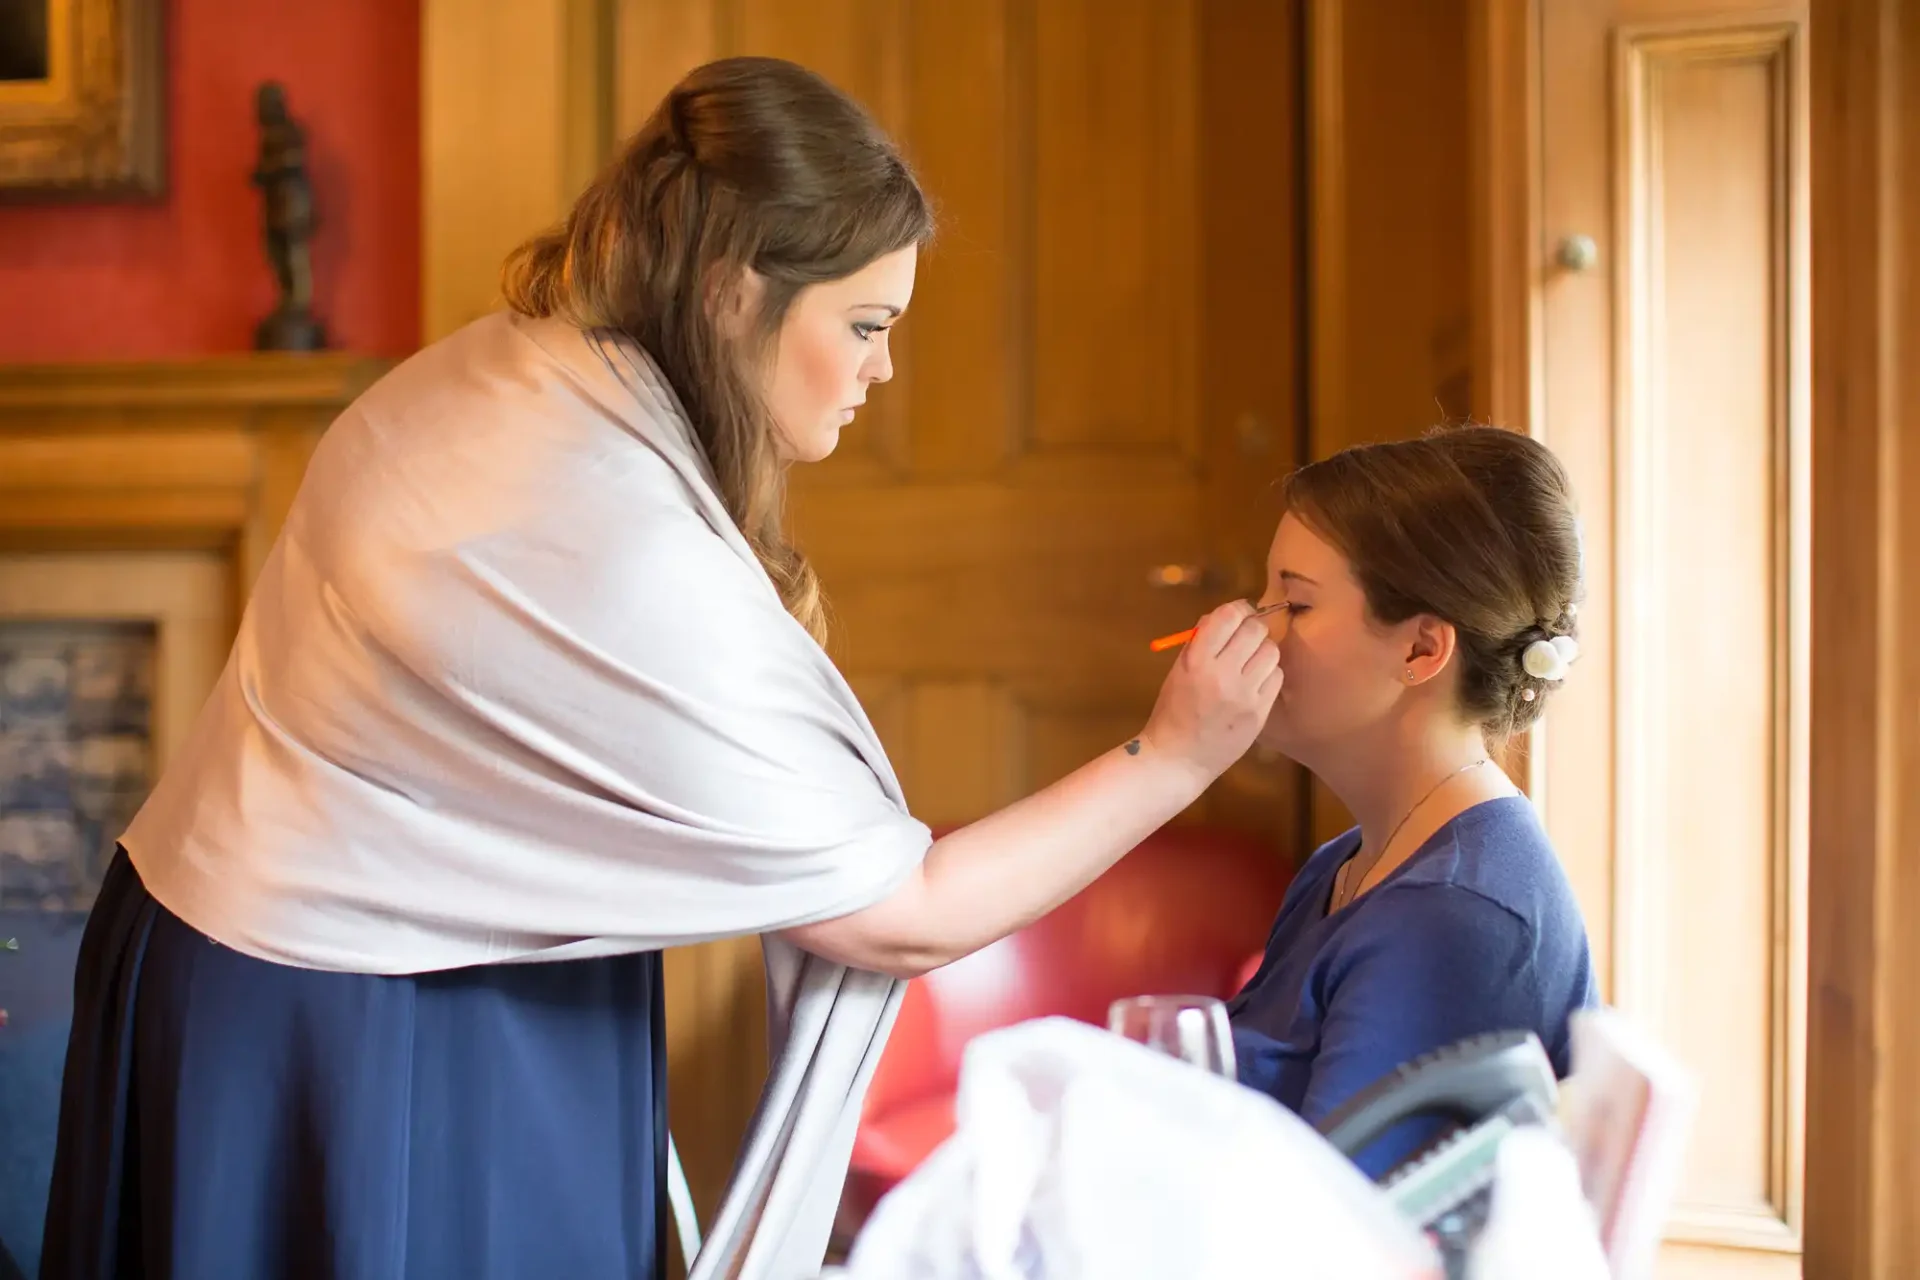 A woman applying makeup to a young girl in an elegantly furnished room.